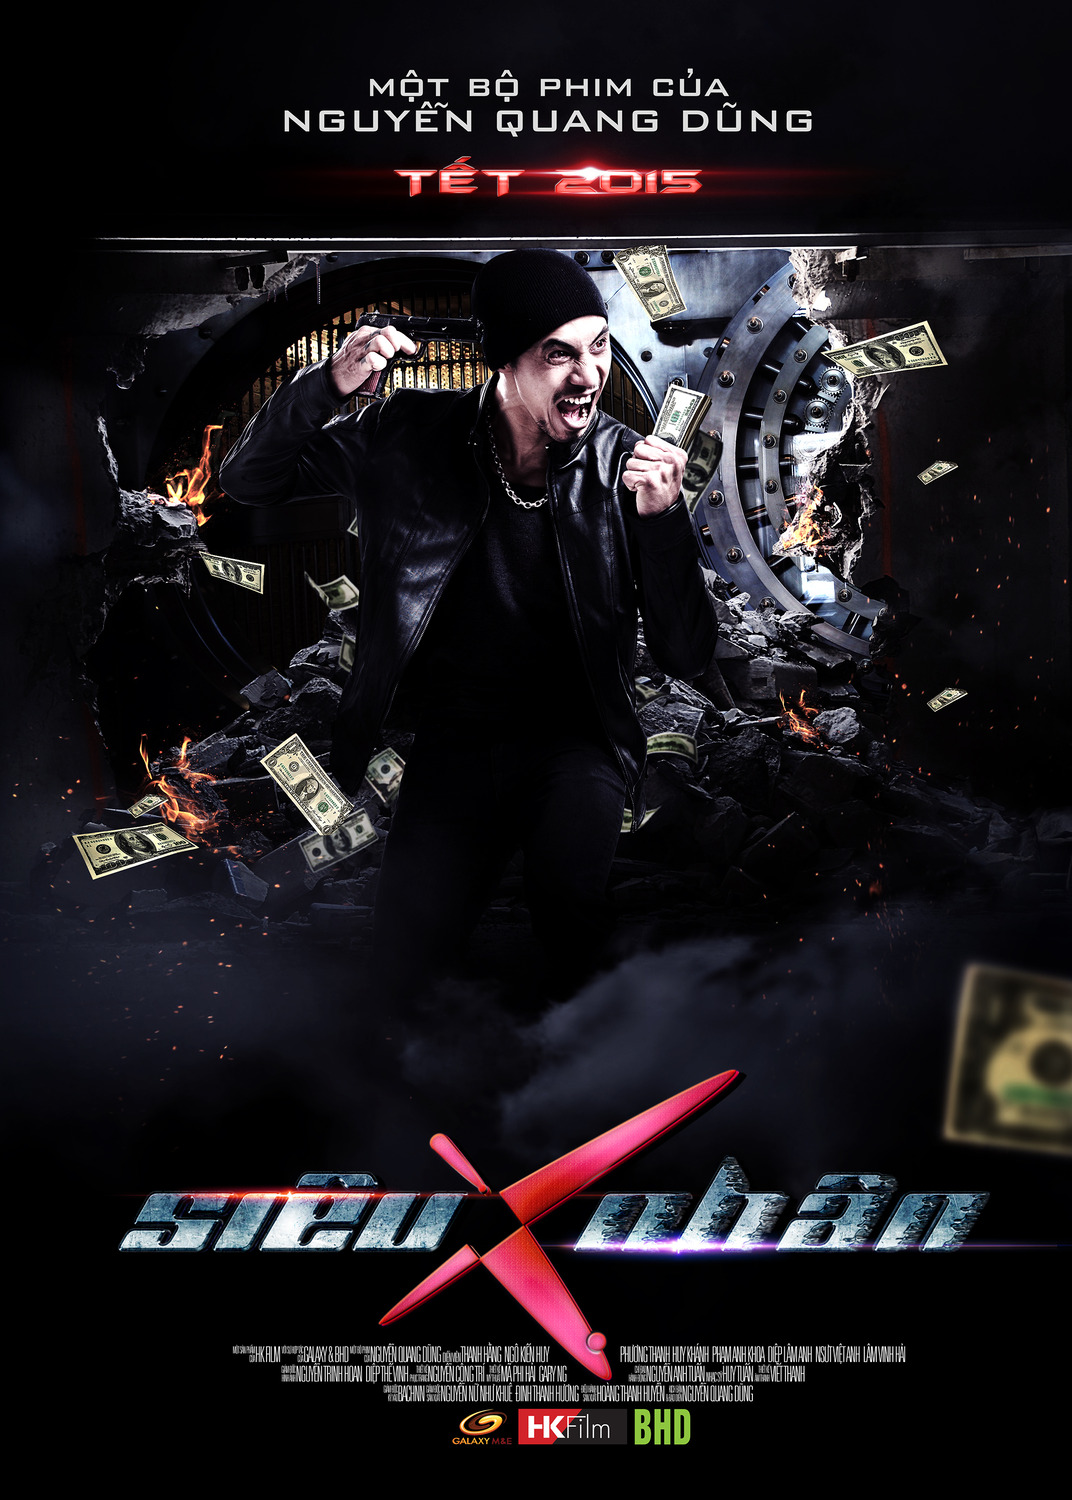 Extra Large Movie Poster Image for Sieu Nhan X: Super X (#6 of 8)